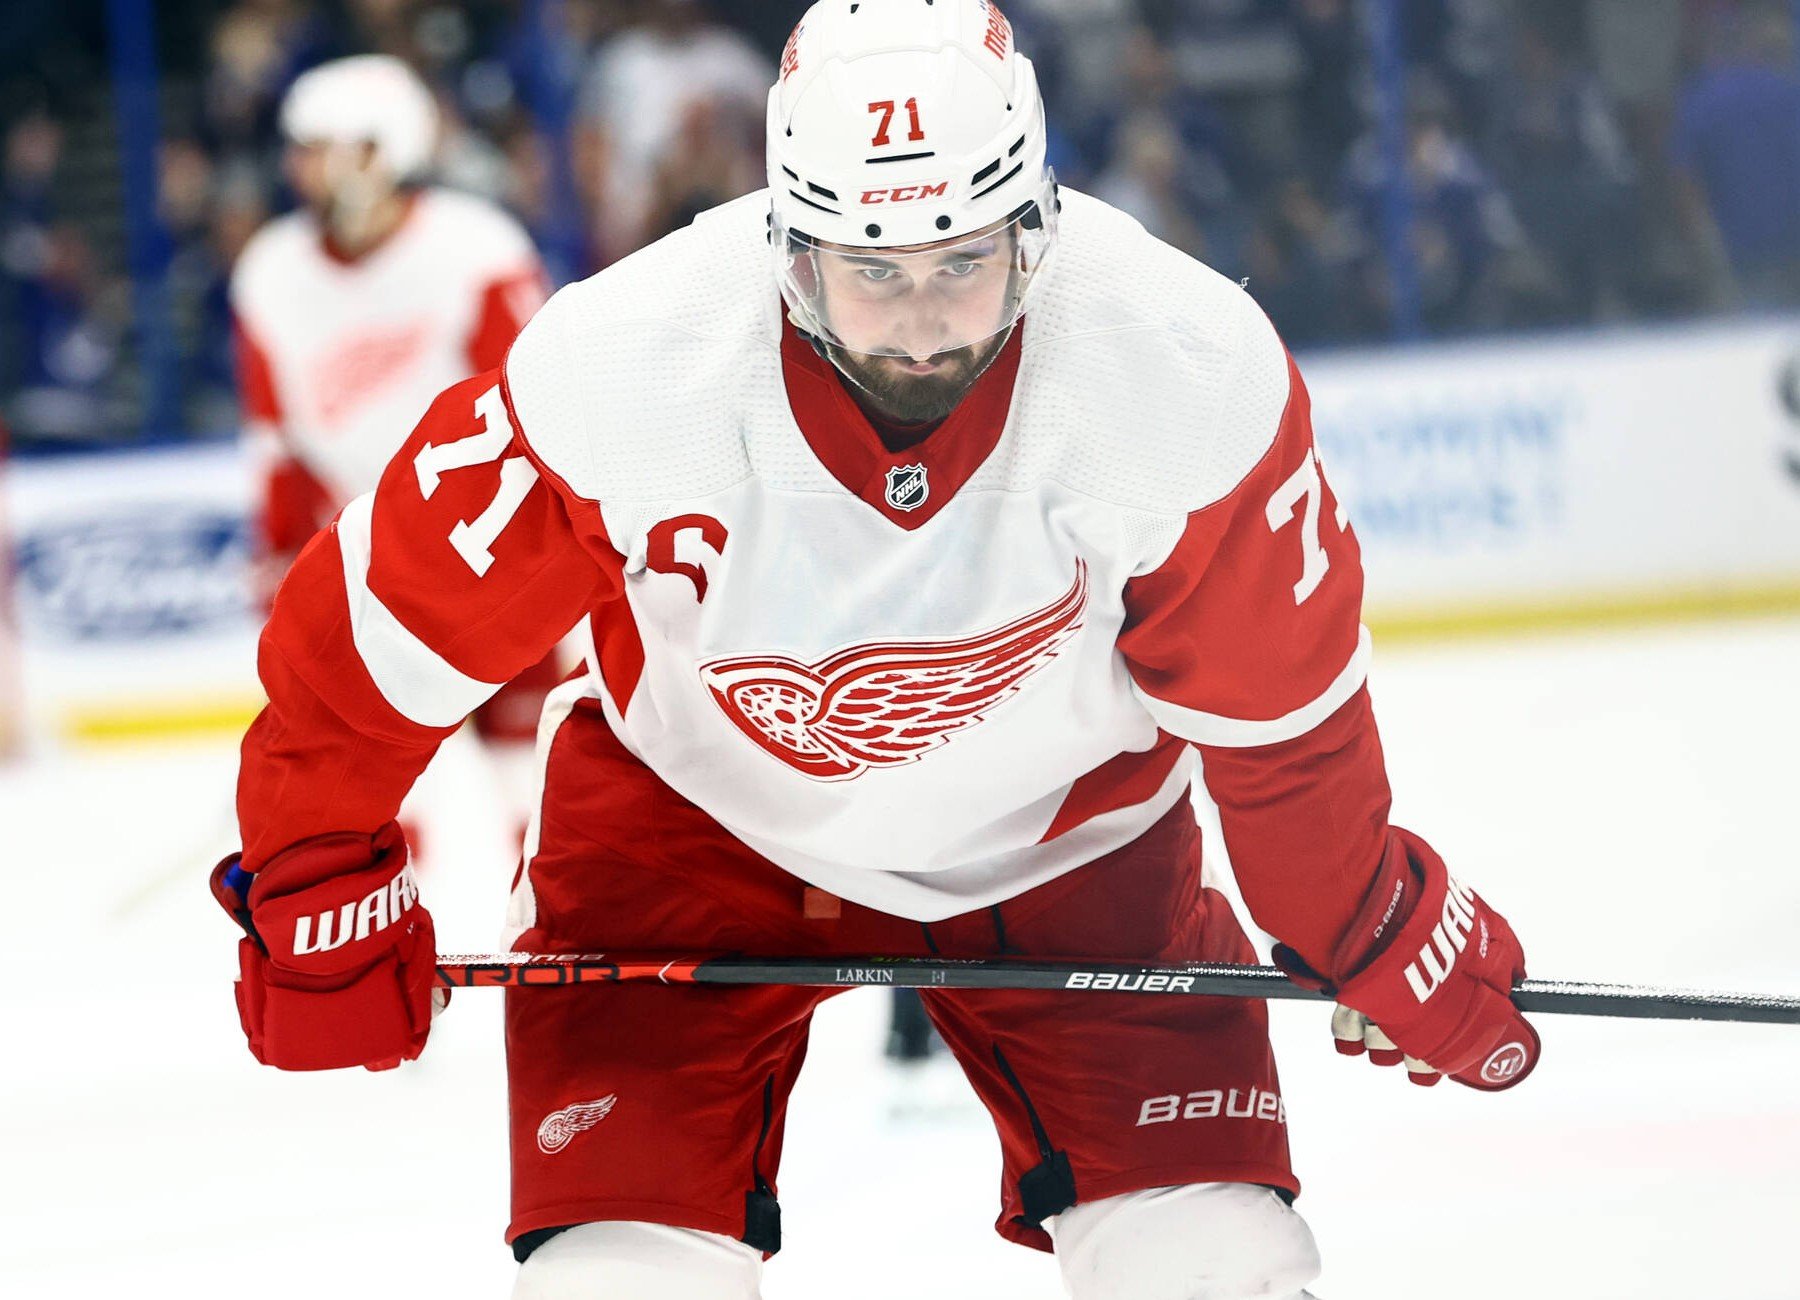 Red Wings' captain Dylan Larkin out for season